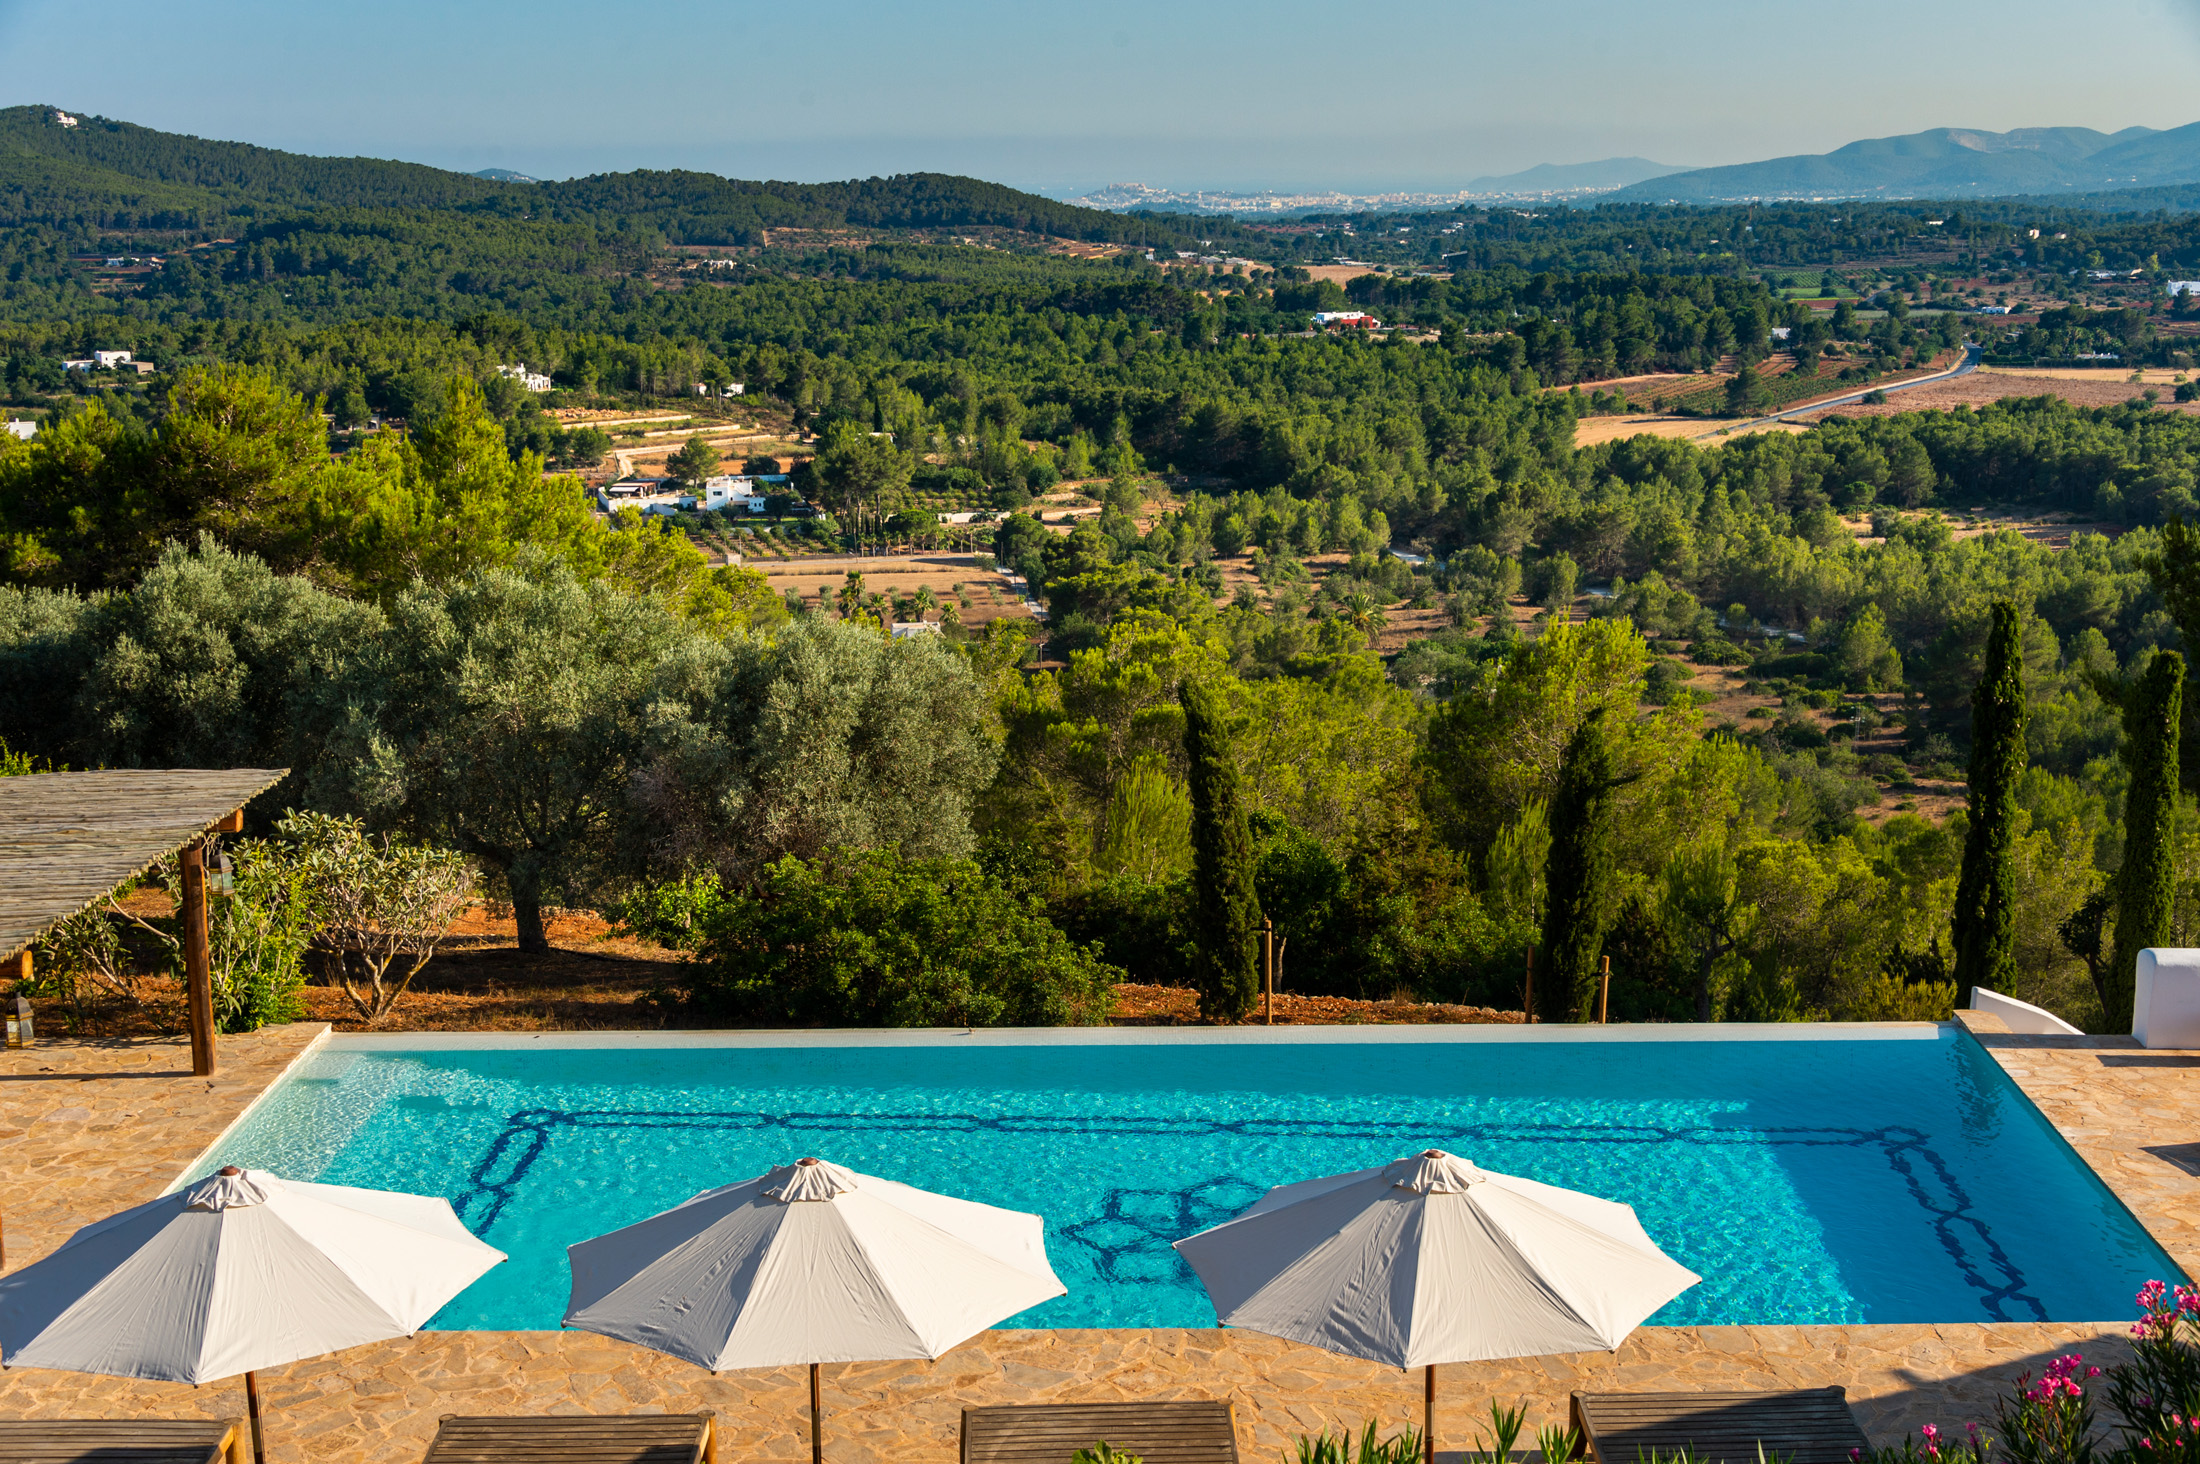 The view from a luxury rental villa in Ibiza